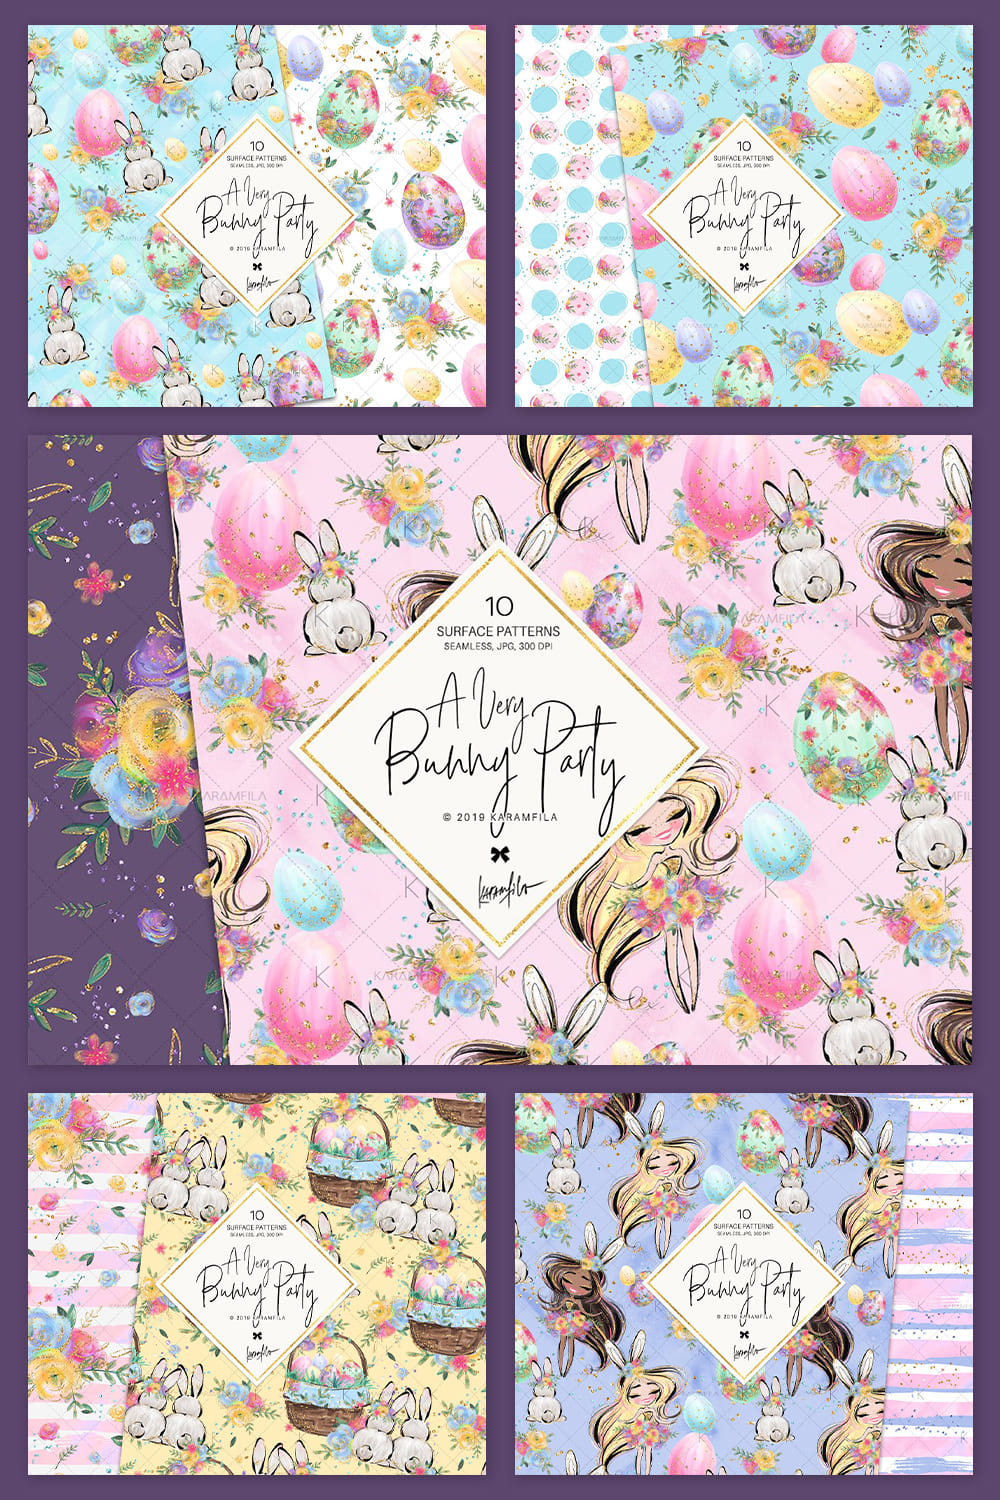 Easter Eggs Bunny Fairy Patterns.